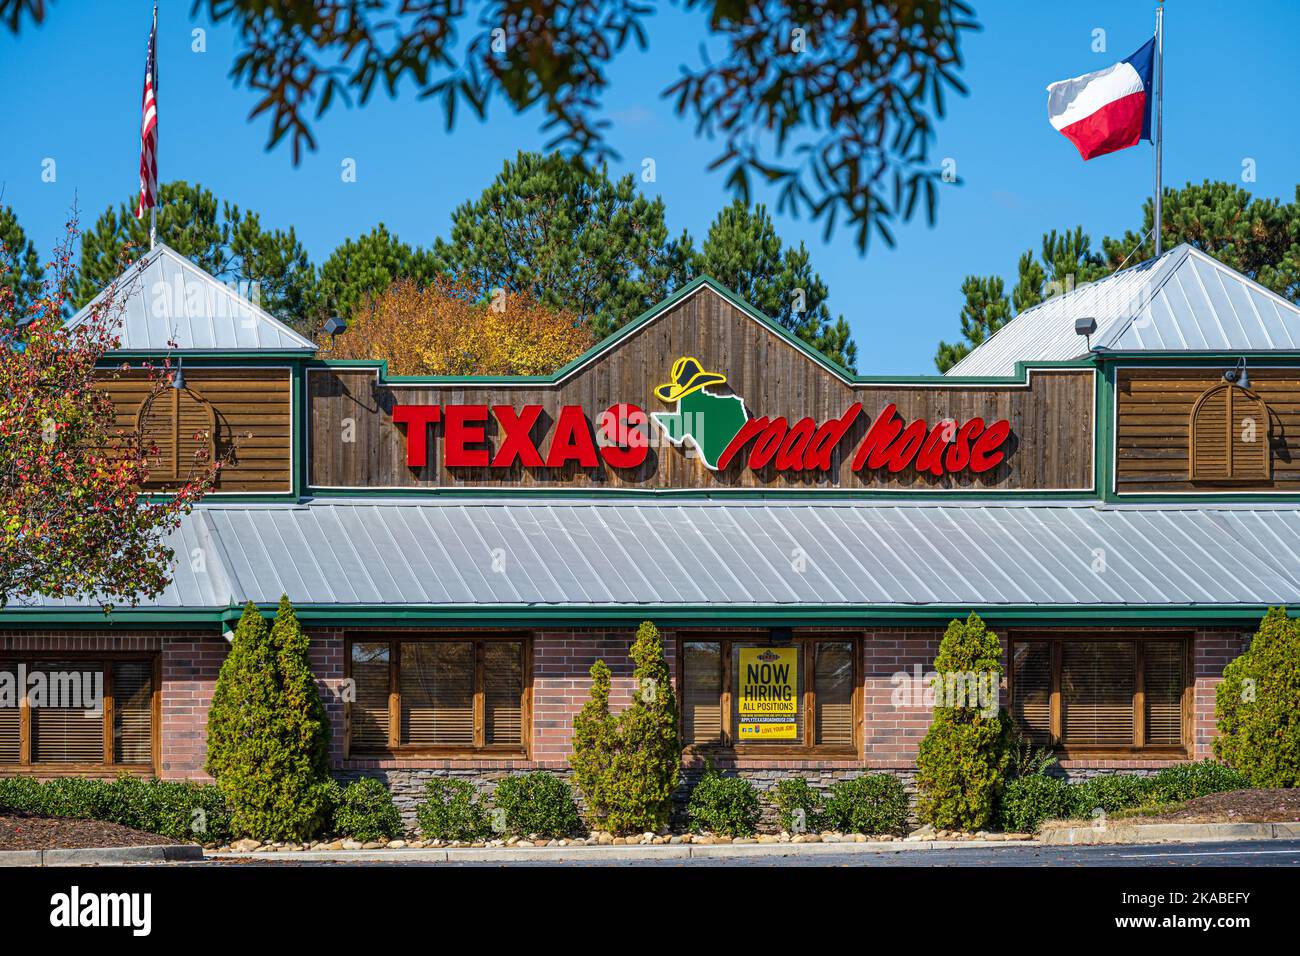 Texas Roadhouse is an American steakhouse restaurant chain known for its hand-cut steaks, and its roasted peanuts in the shell on each table. (USA) Stock Photo